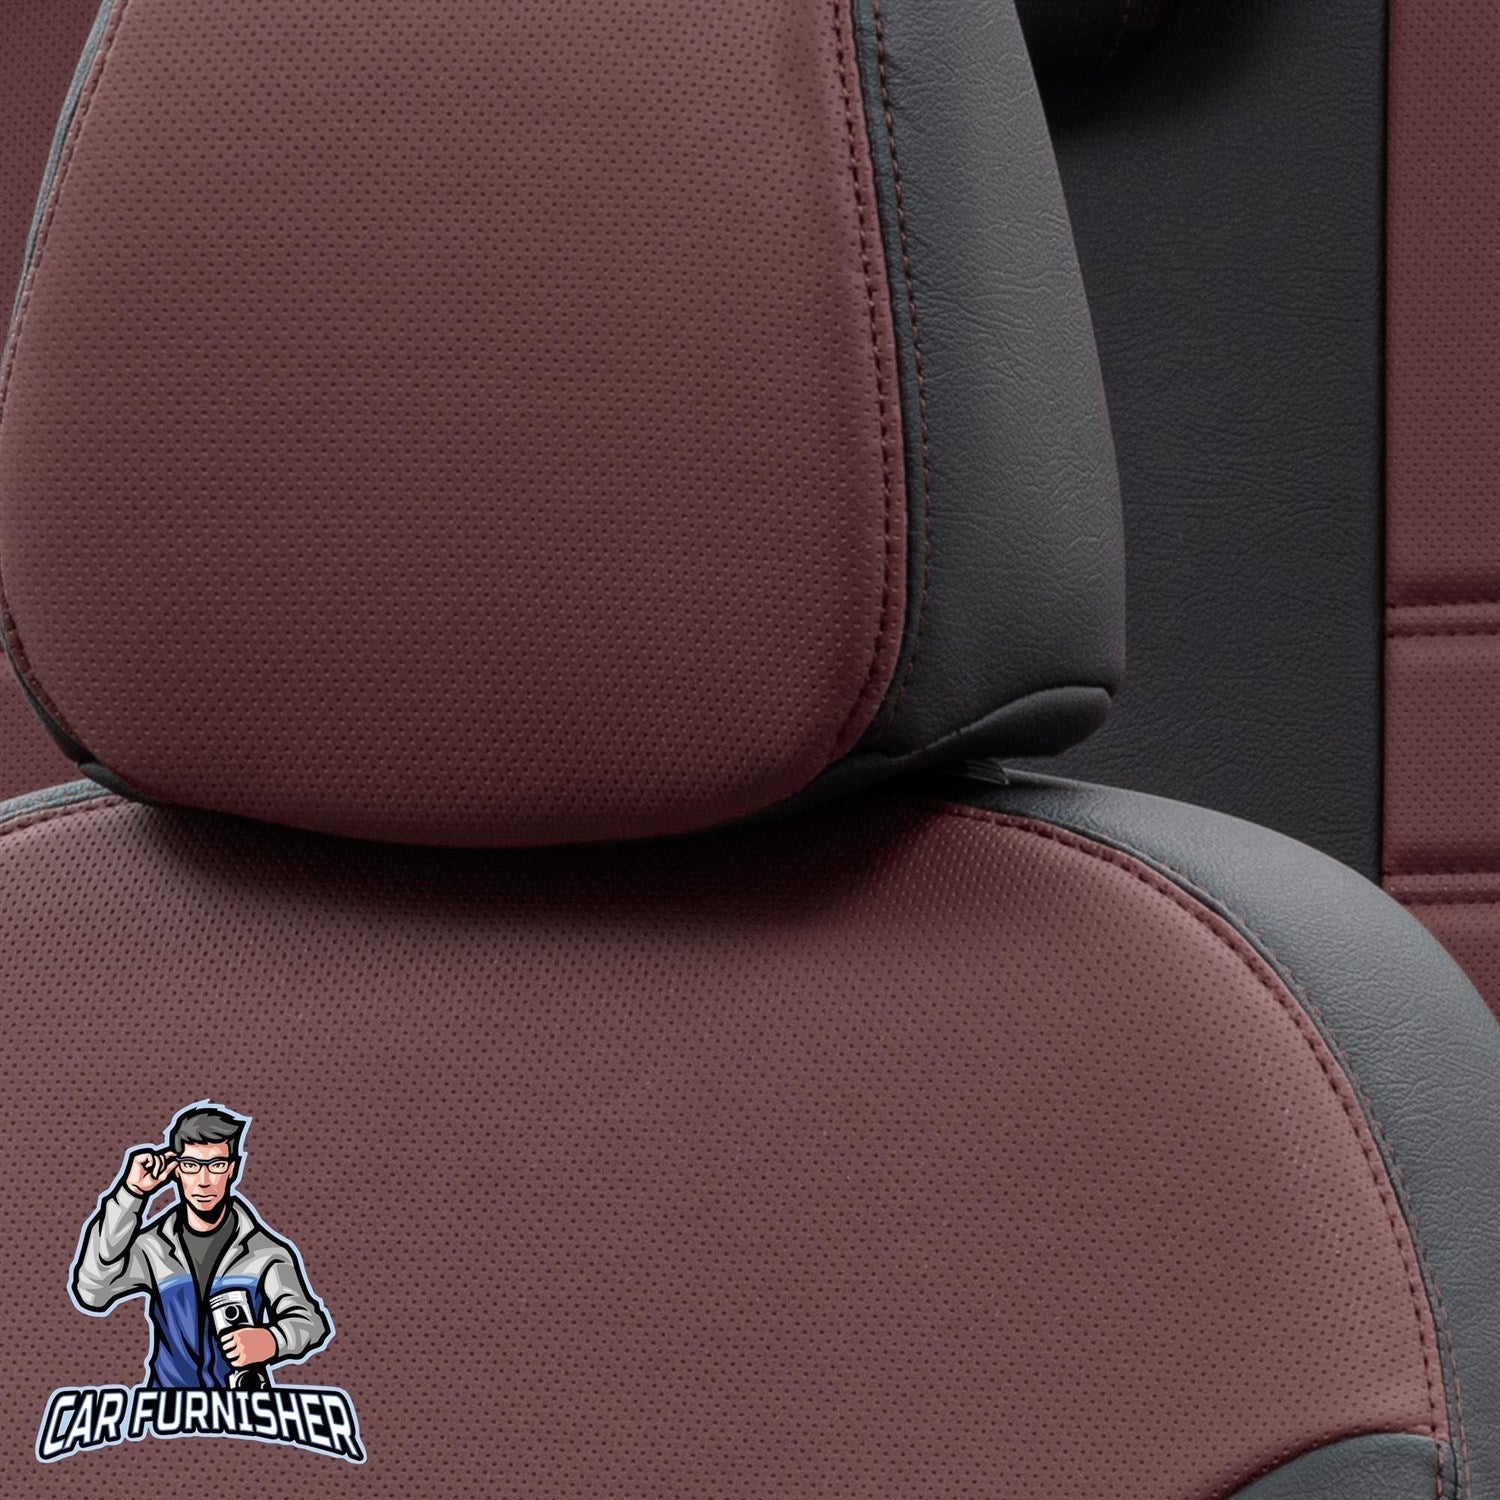 Renault Modus Seat Covers Istanbul Leather Design Burgundy Leather